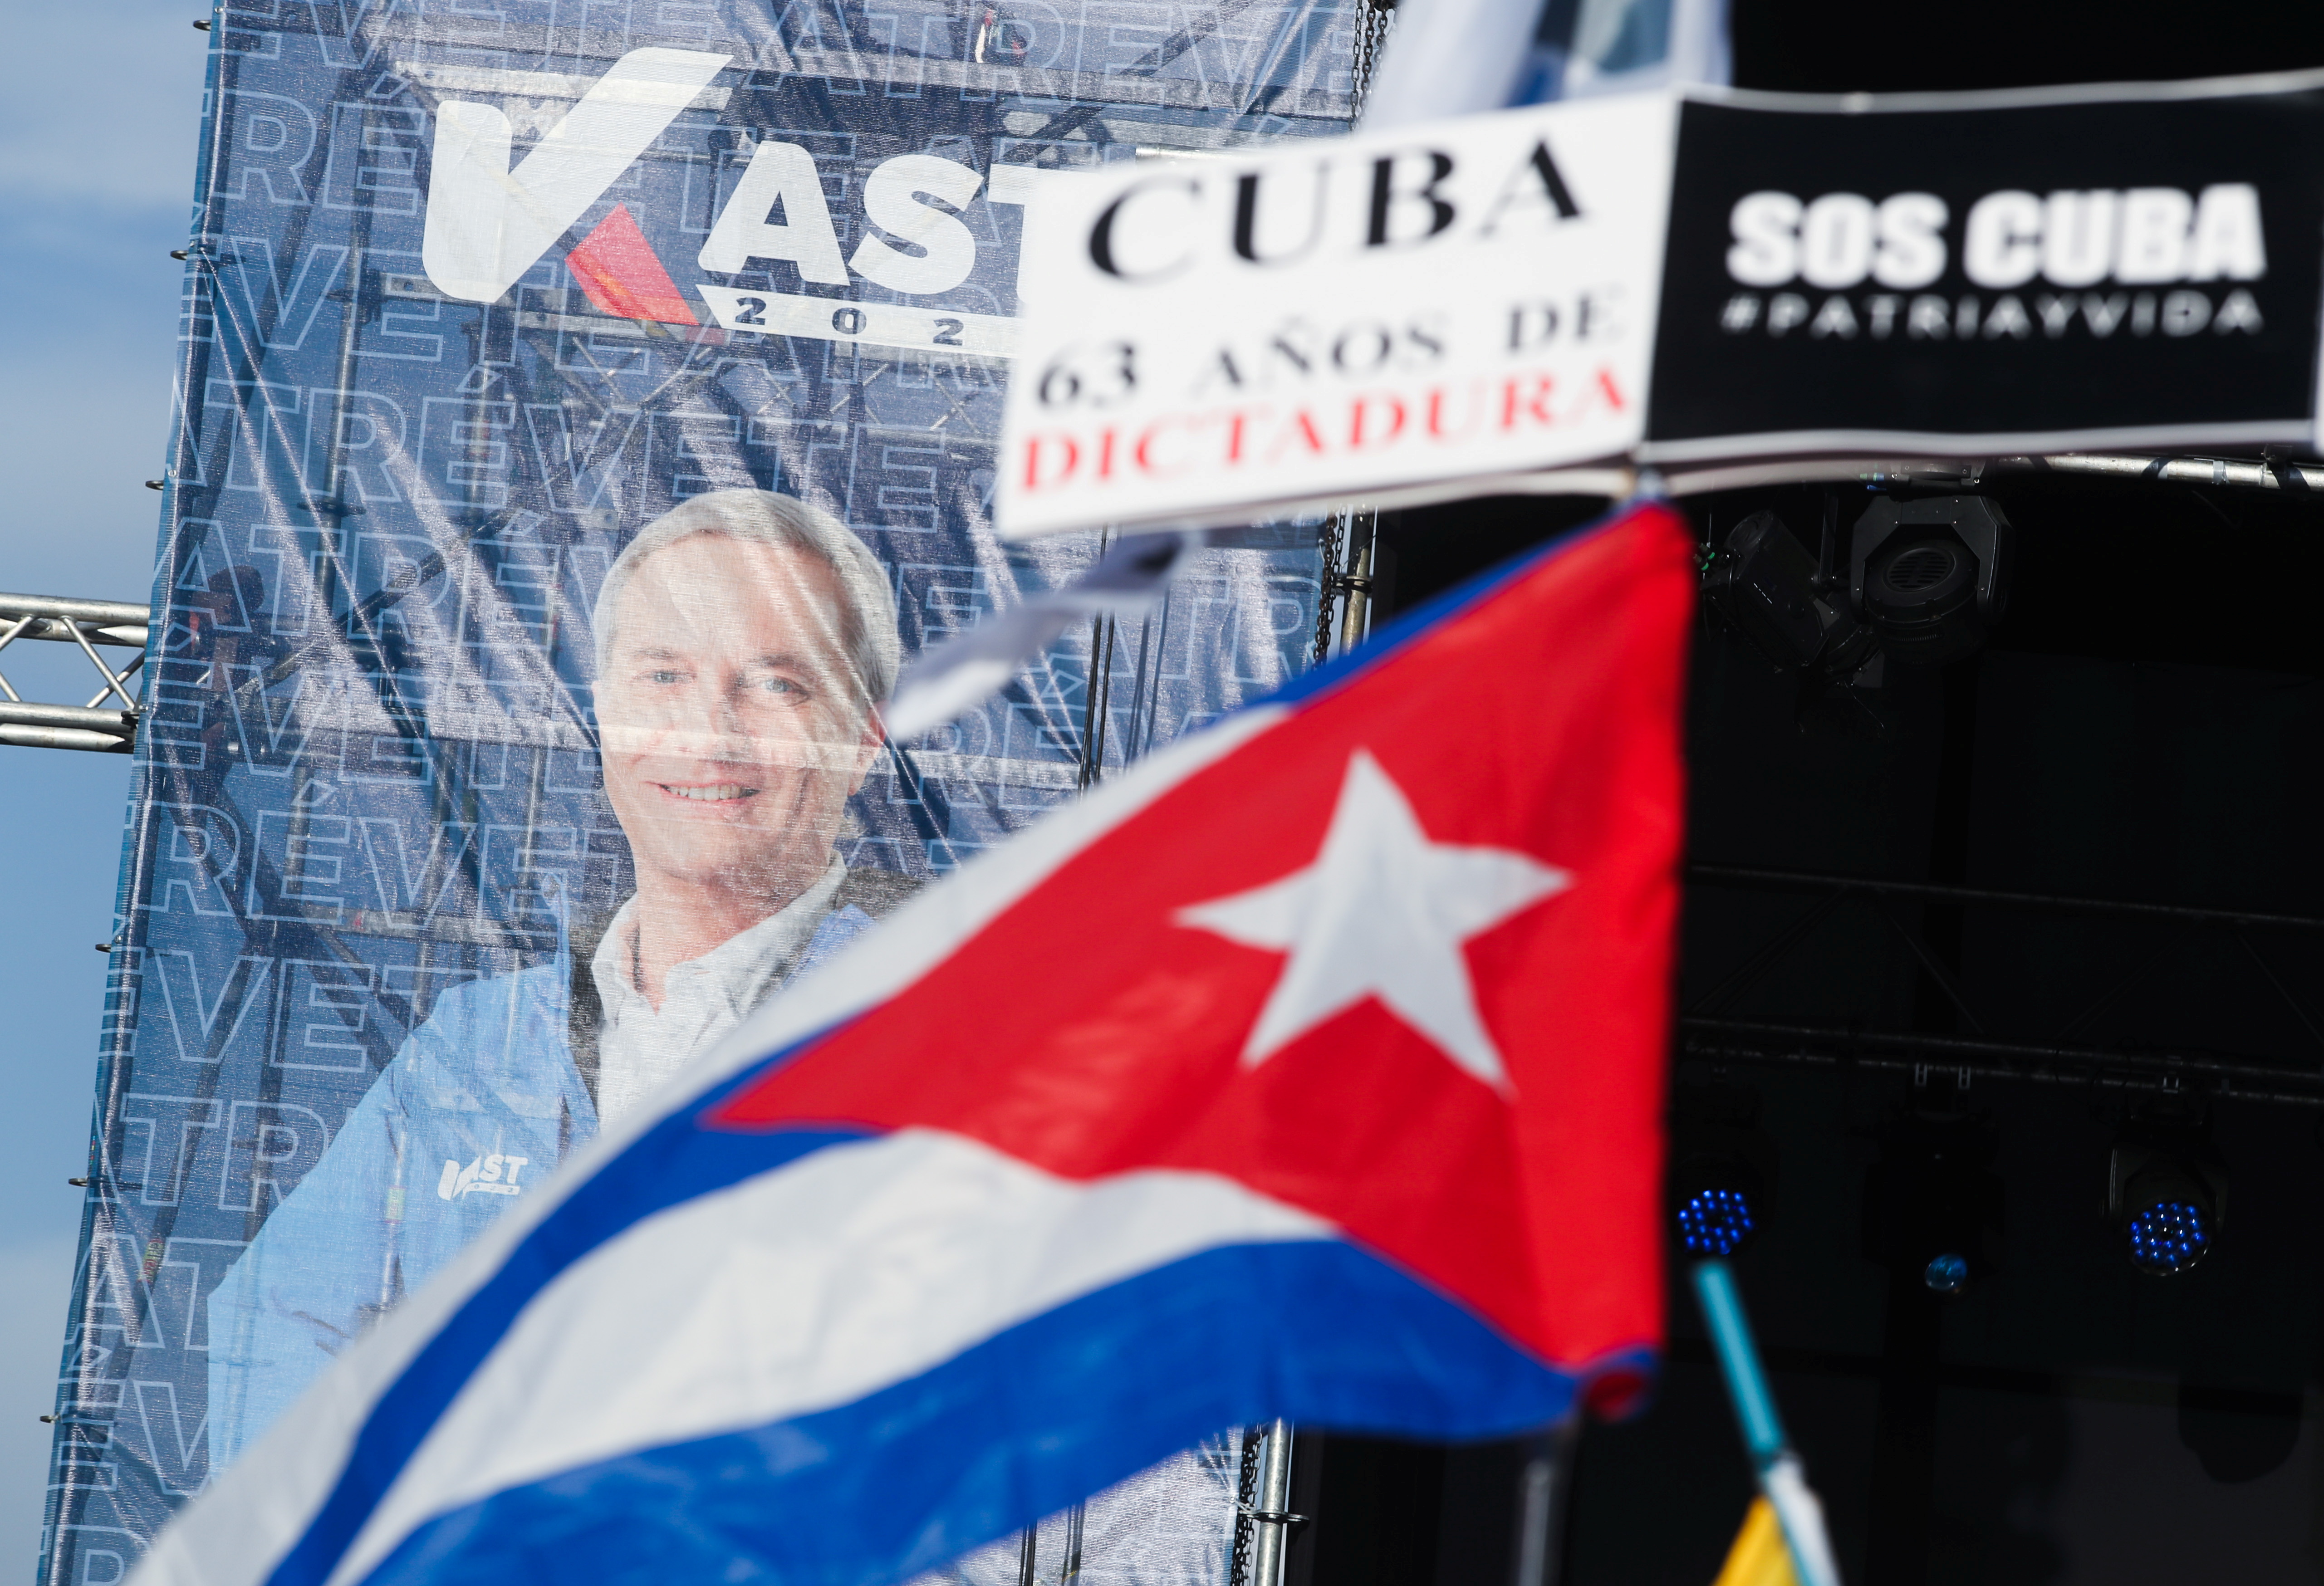 Supporters of Chilean presidential candidate Jose Antonio Kast wave a Cuban flag and sign during his closing campaign rally in Santiago, Chile, November 18, 2021. The sign reads as 